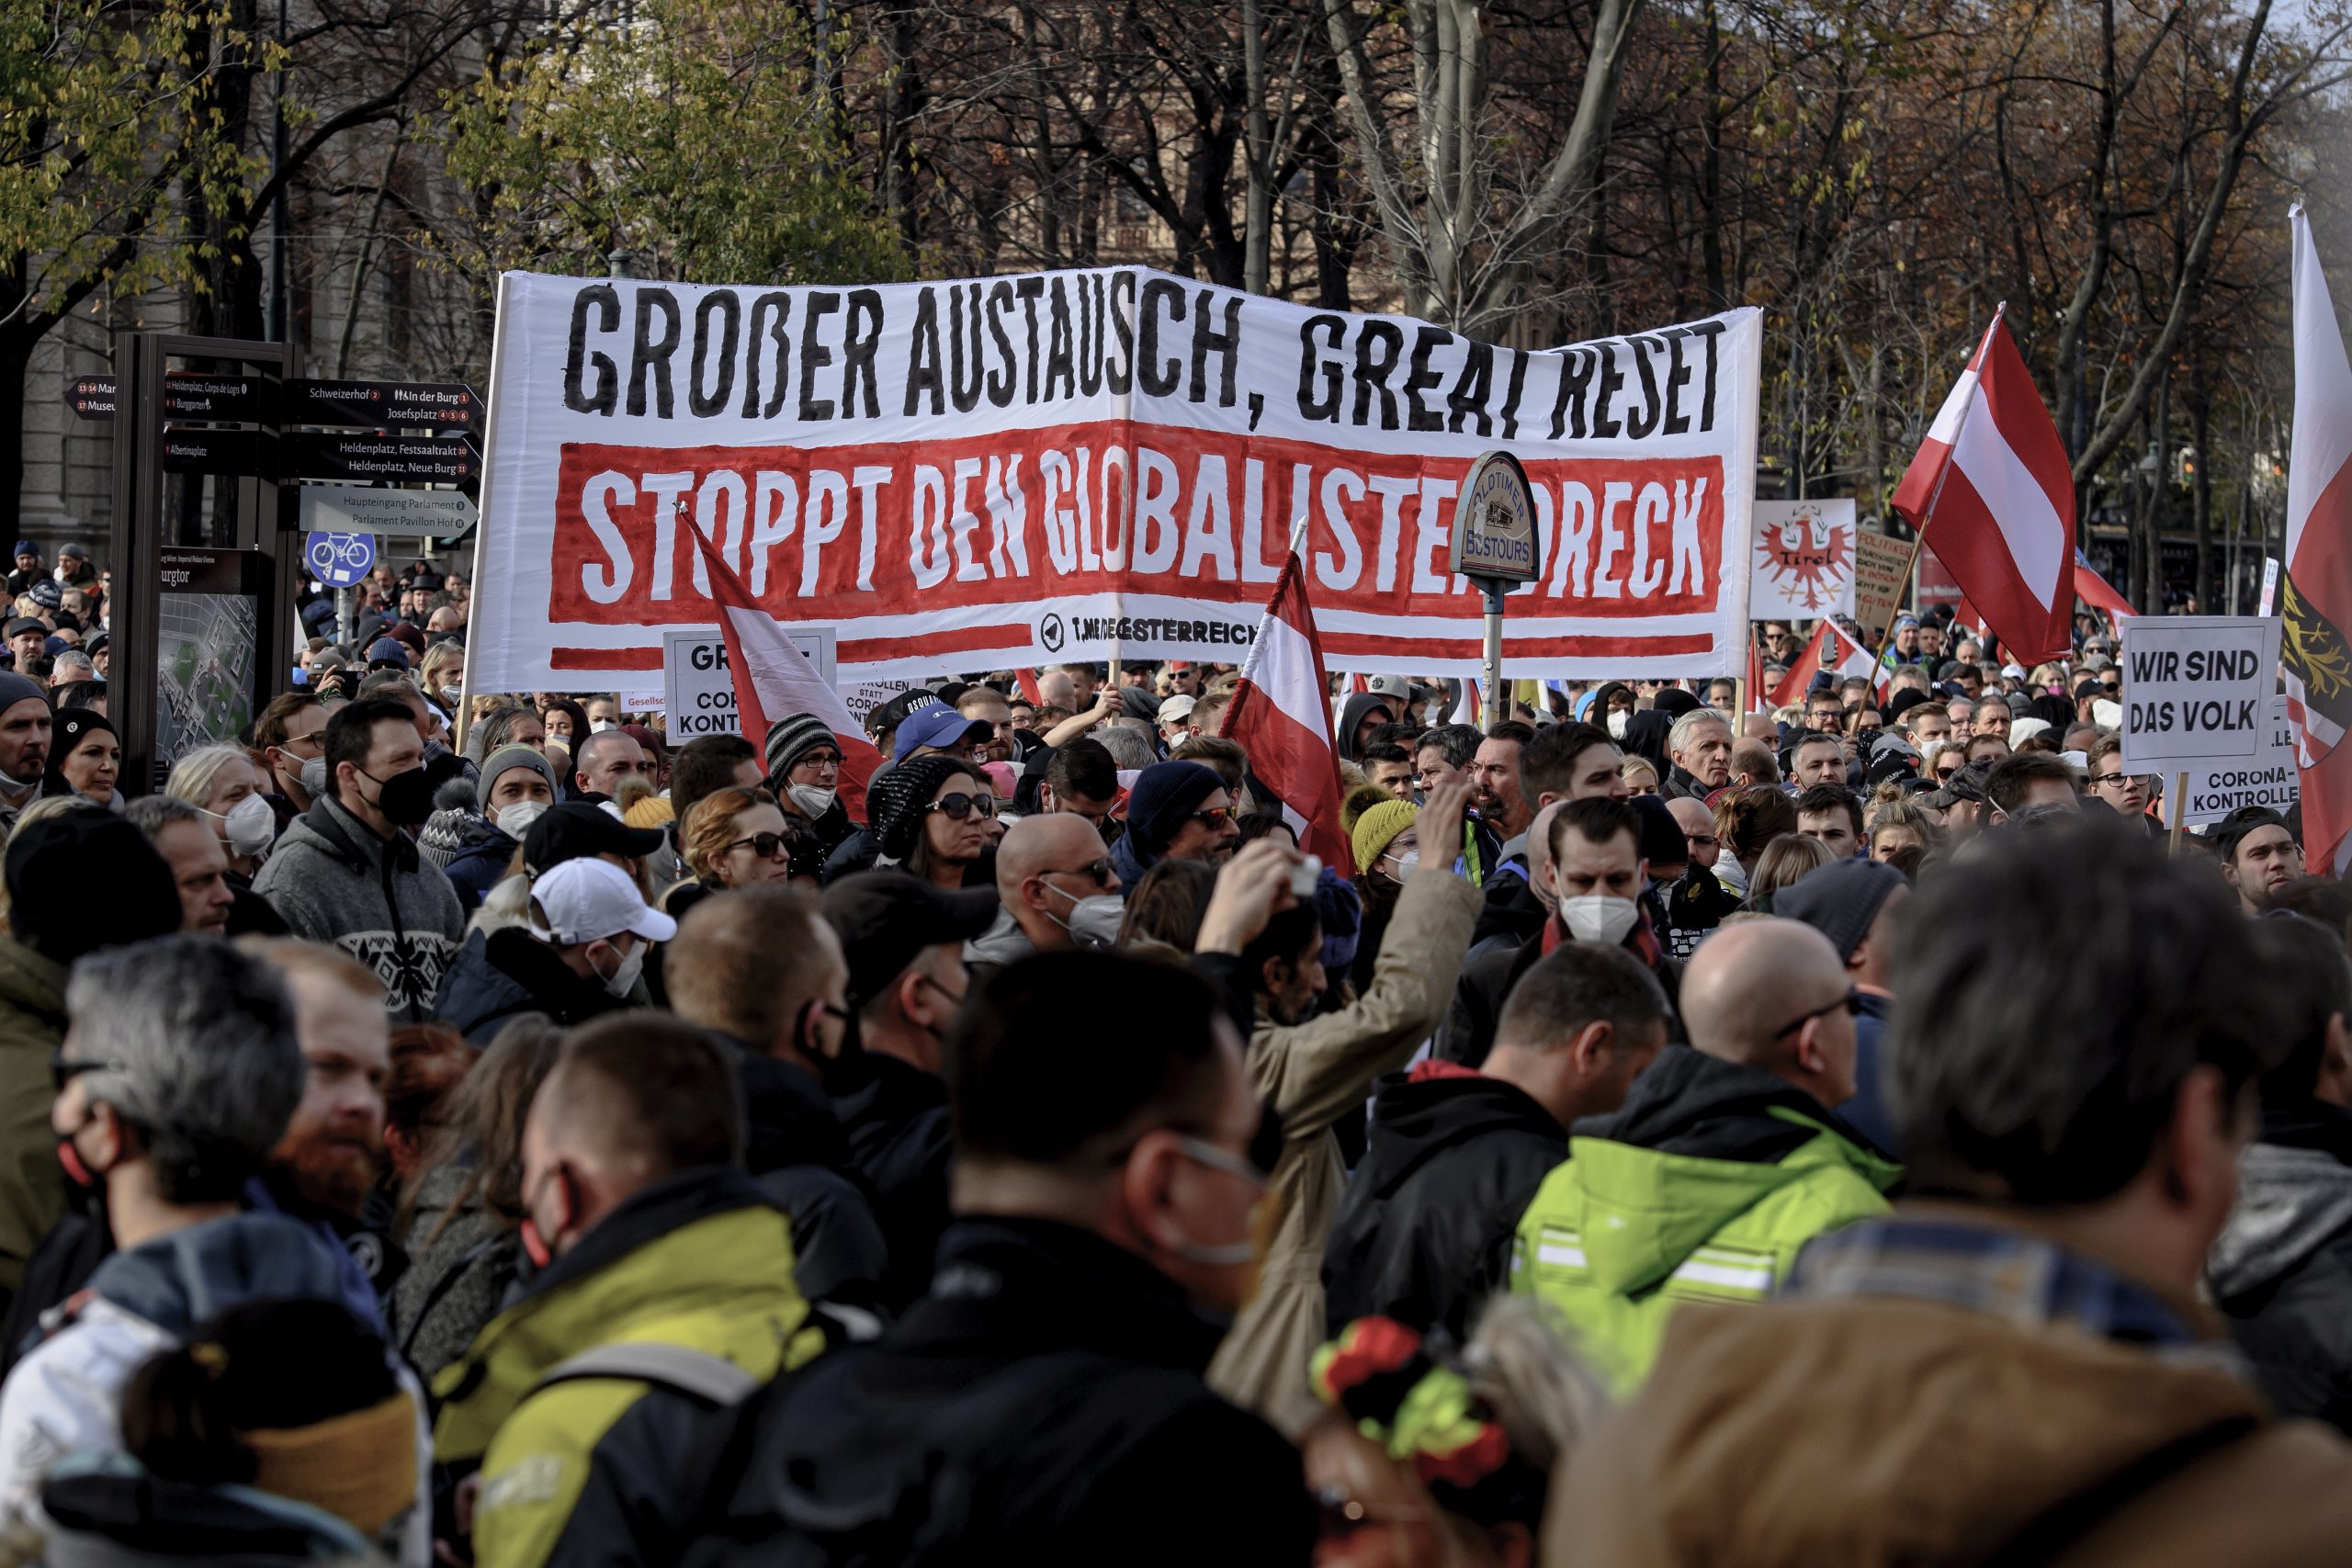 epa09593377 Protesters display a banner reading 'Grosser Austausch, great Reset Stoppt den Globalistendreck' ('Great exchange, Great Reset, Stop the globalist filth') during a demonstration against the measures of the Austrian government to slow down the ongoing pandemic of the COVID-19 disease caused by the SARS-CoV-2 coronavirus in Vienna, Austria, 20 November 2021. Austrian Chancellor Alexander Schallenberg announced a mandatory vaccination against the SARS-CoV-2 coronavirus by February 2022, and a general nationwide lockdown to stem the ongoing pandemic of COVID-19, starting from 22 November.  EPA/CHRISTIAN BRUNA